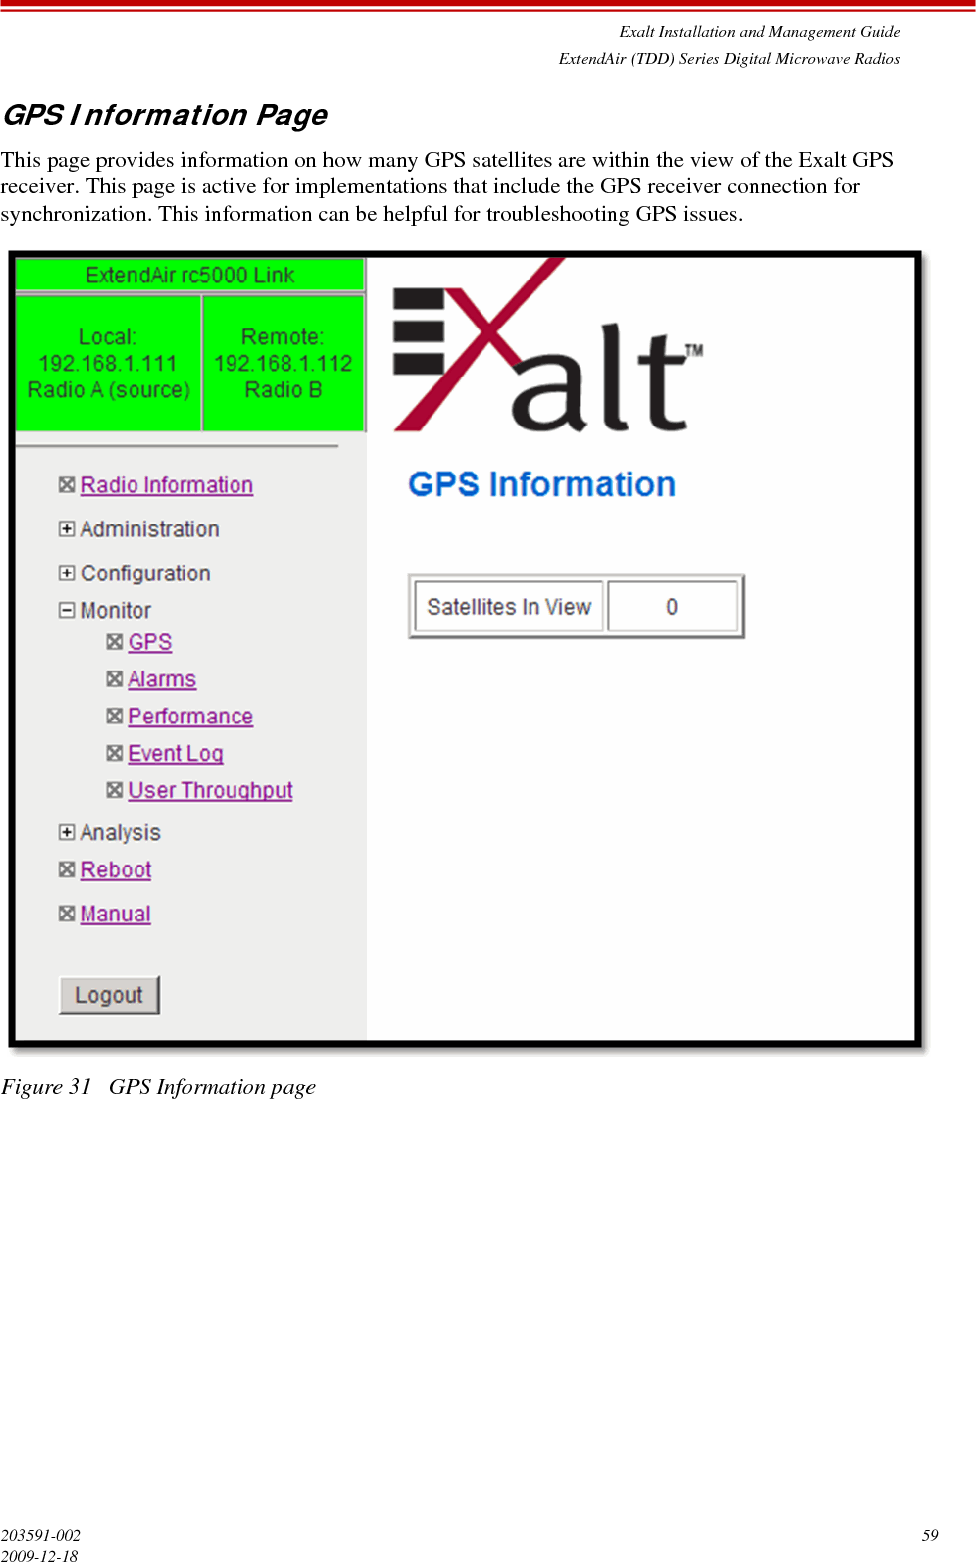 Exalt Installation and Management GuideExtendAir (TDD) Series Digital Microwave Radios203591-002 592009-12-18GPS Information PageThis page provides information on how many GPS satellites are within the view of the Exalt GPS receiver. This page is active for implementations that include the GPS receiver connection for synchronization. This information can be helpful for troubleshooting GPS issues.Figure 31   GPS Information page